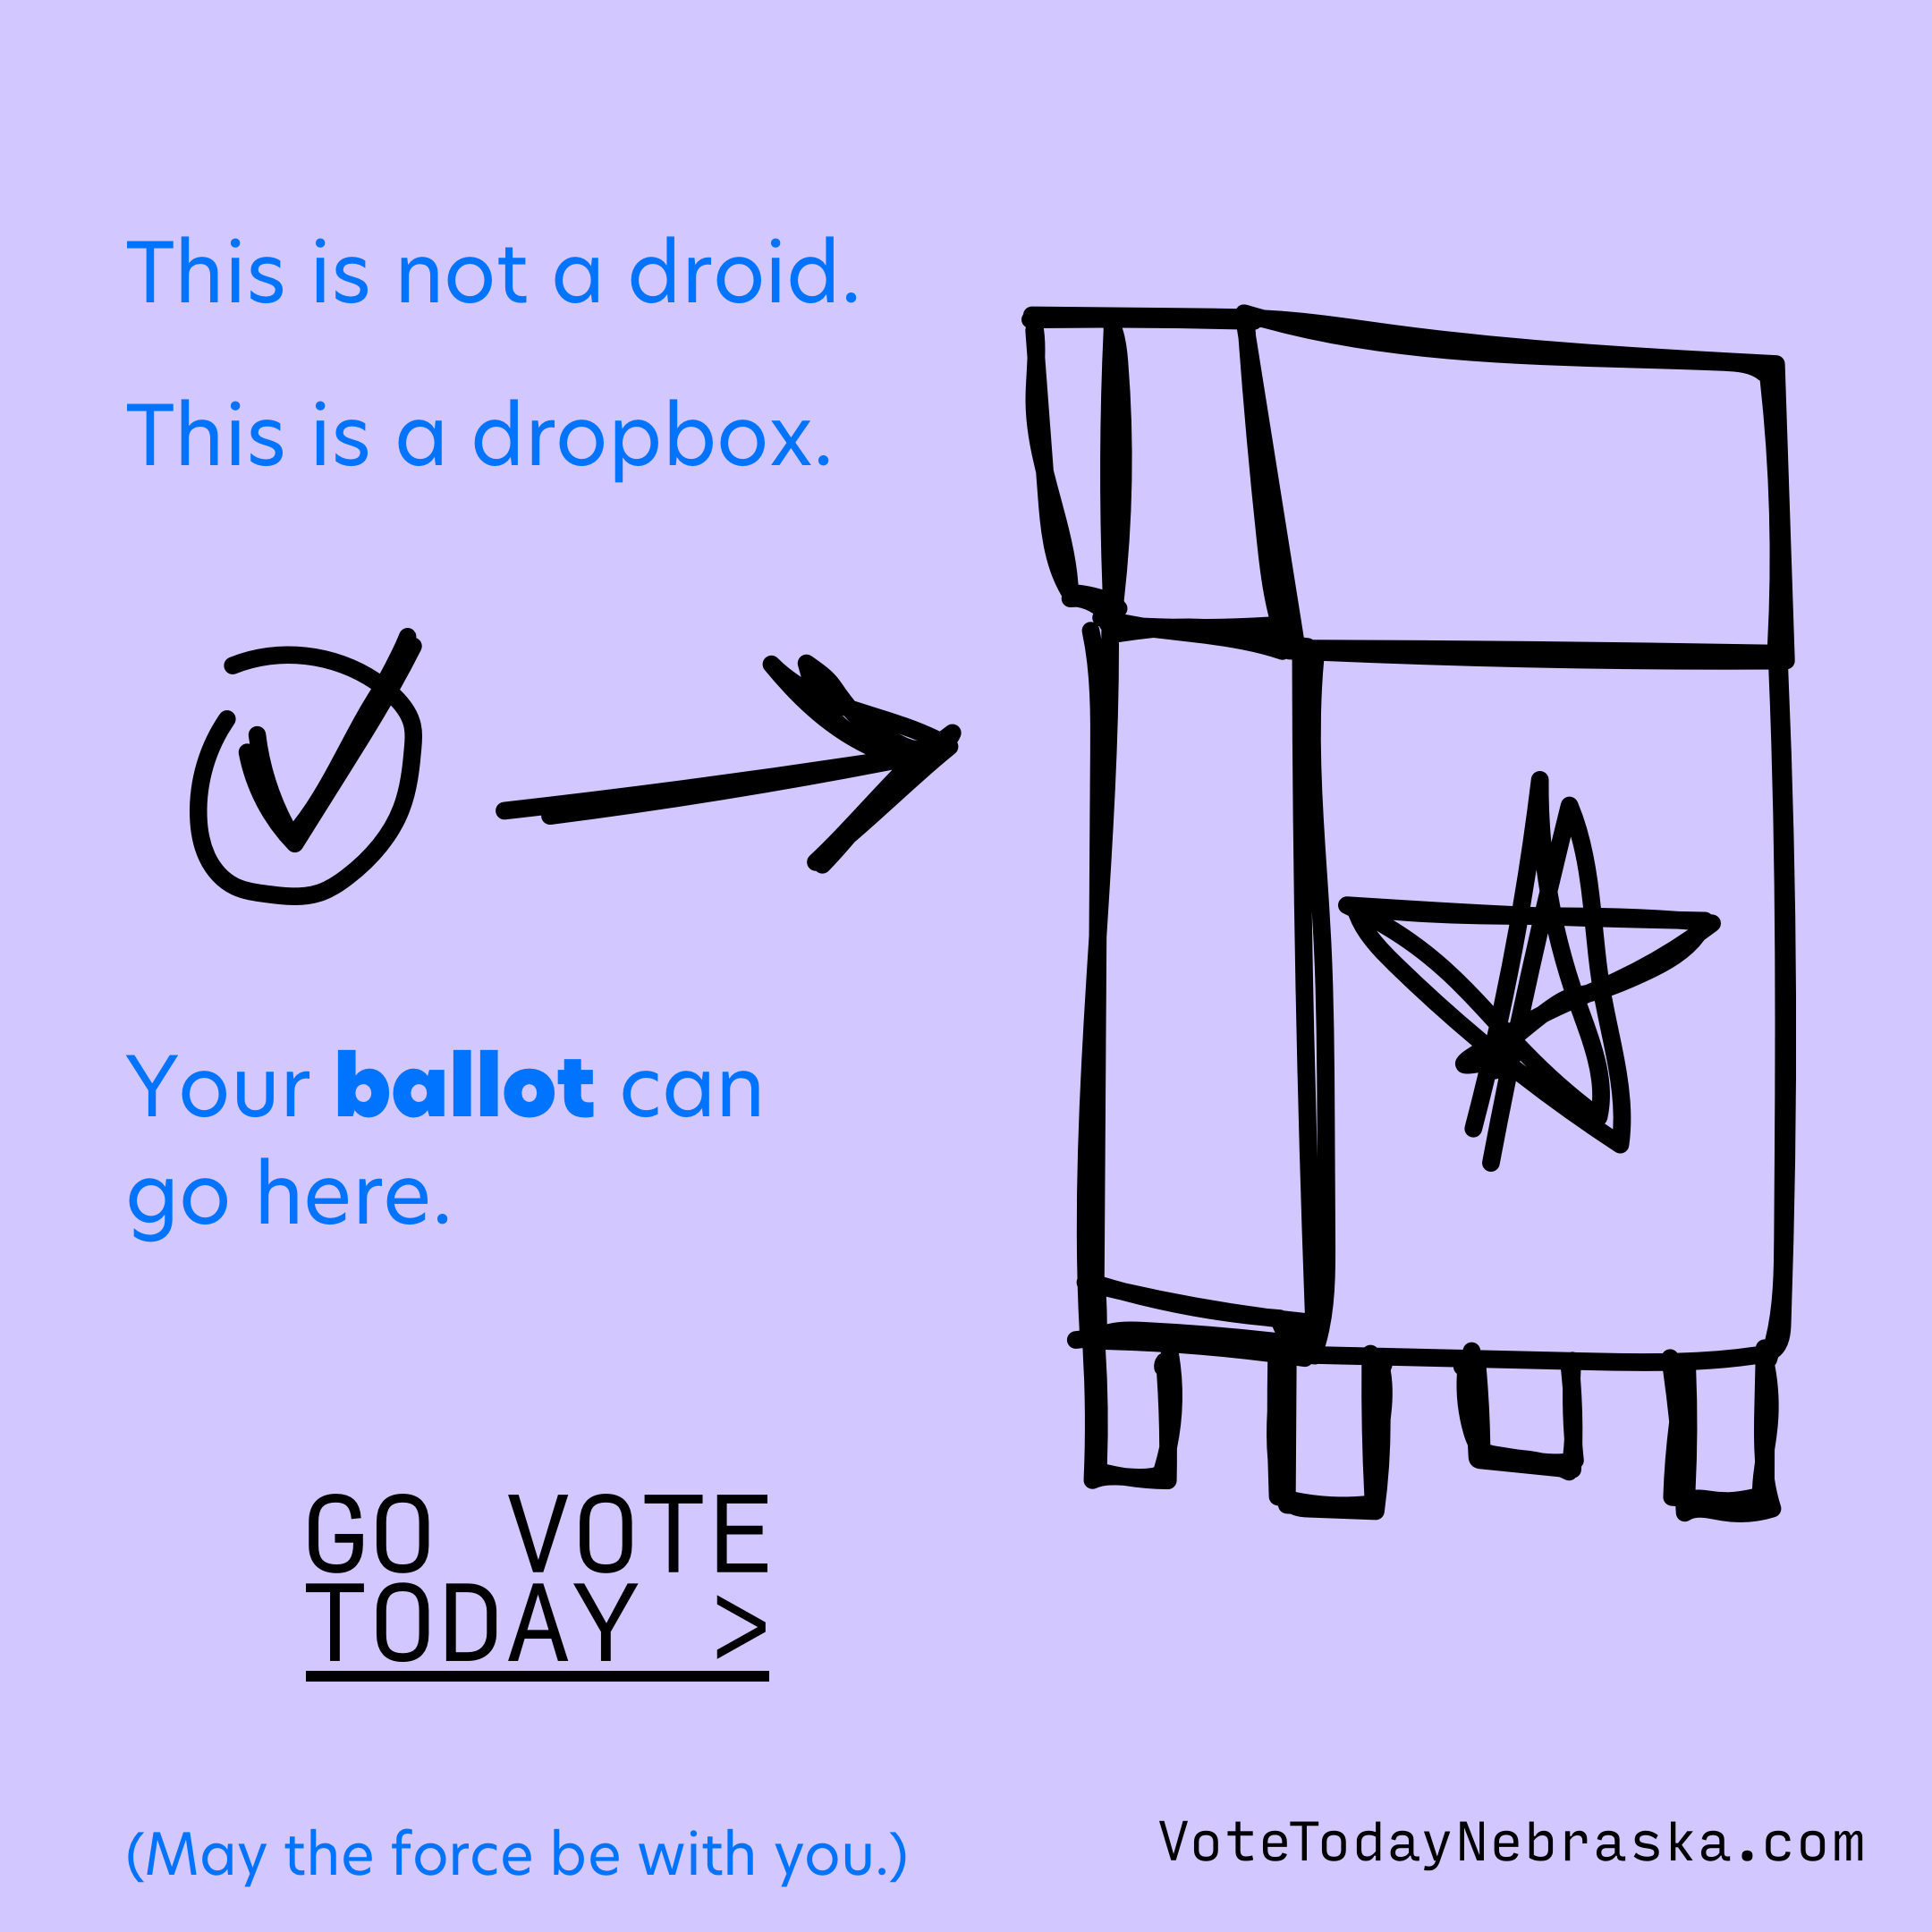 This is not a droid. This is a dropbox. Your ballot can go here.